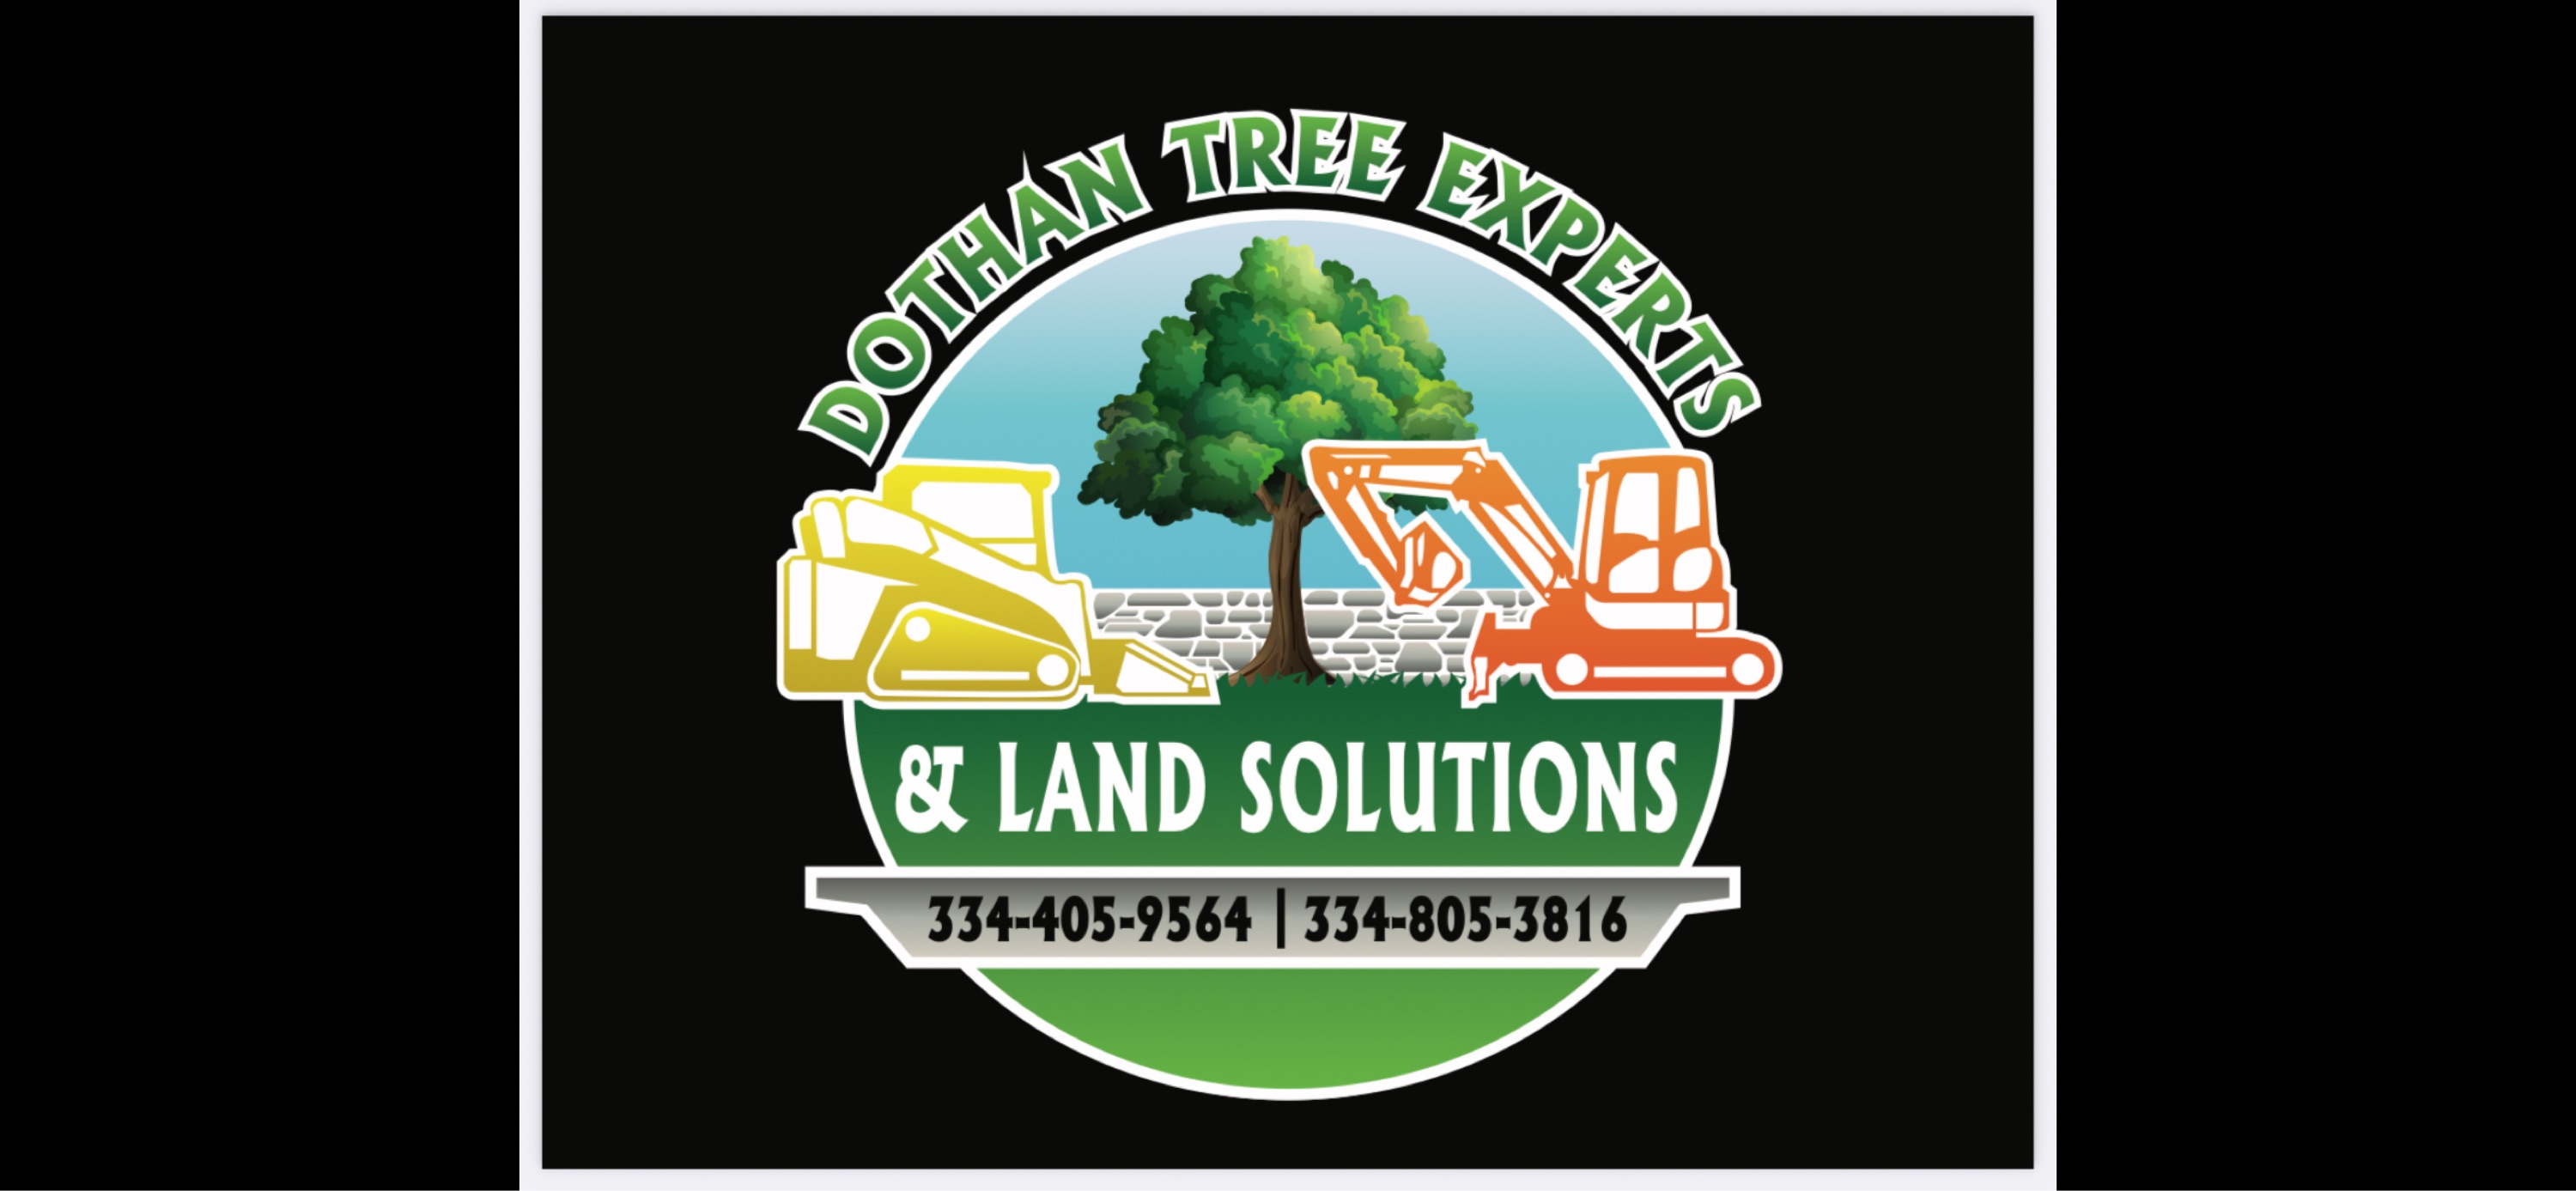 Dothan Tree Experts & Land Solutions Logo